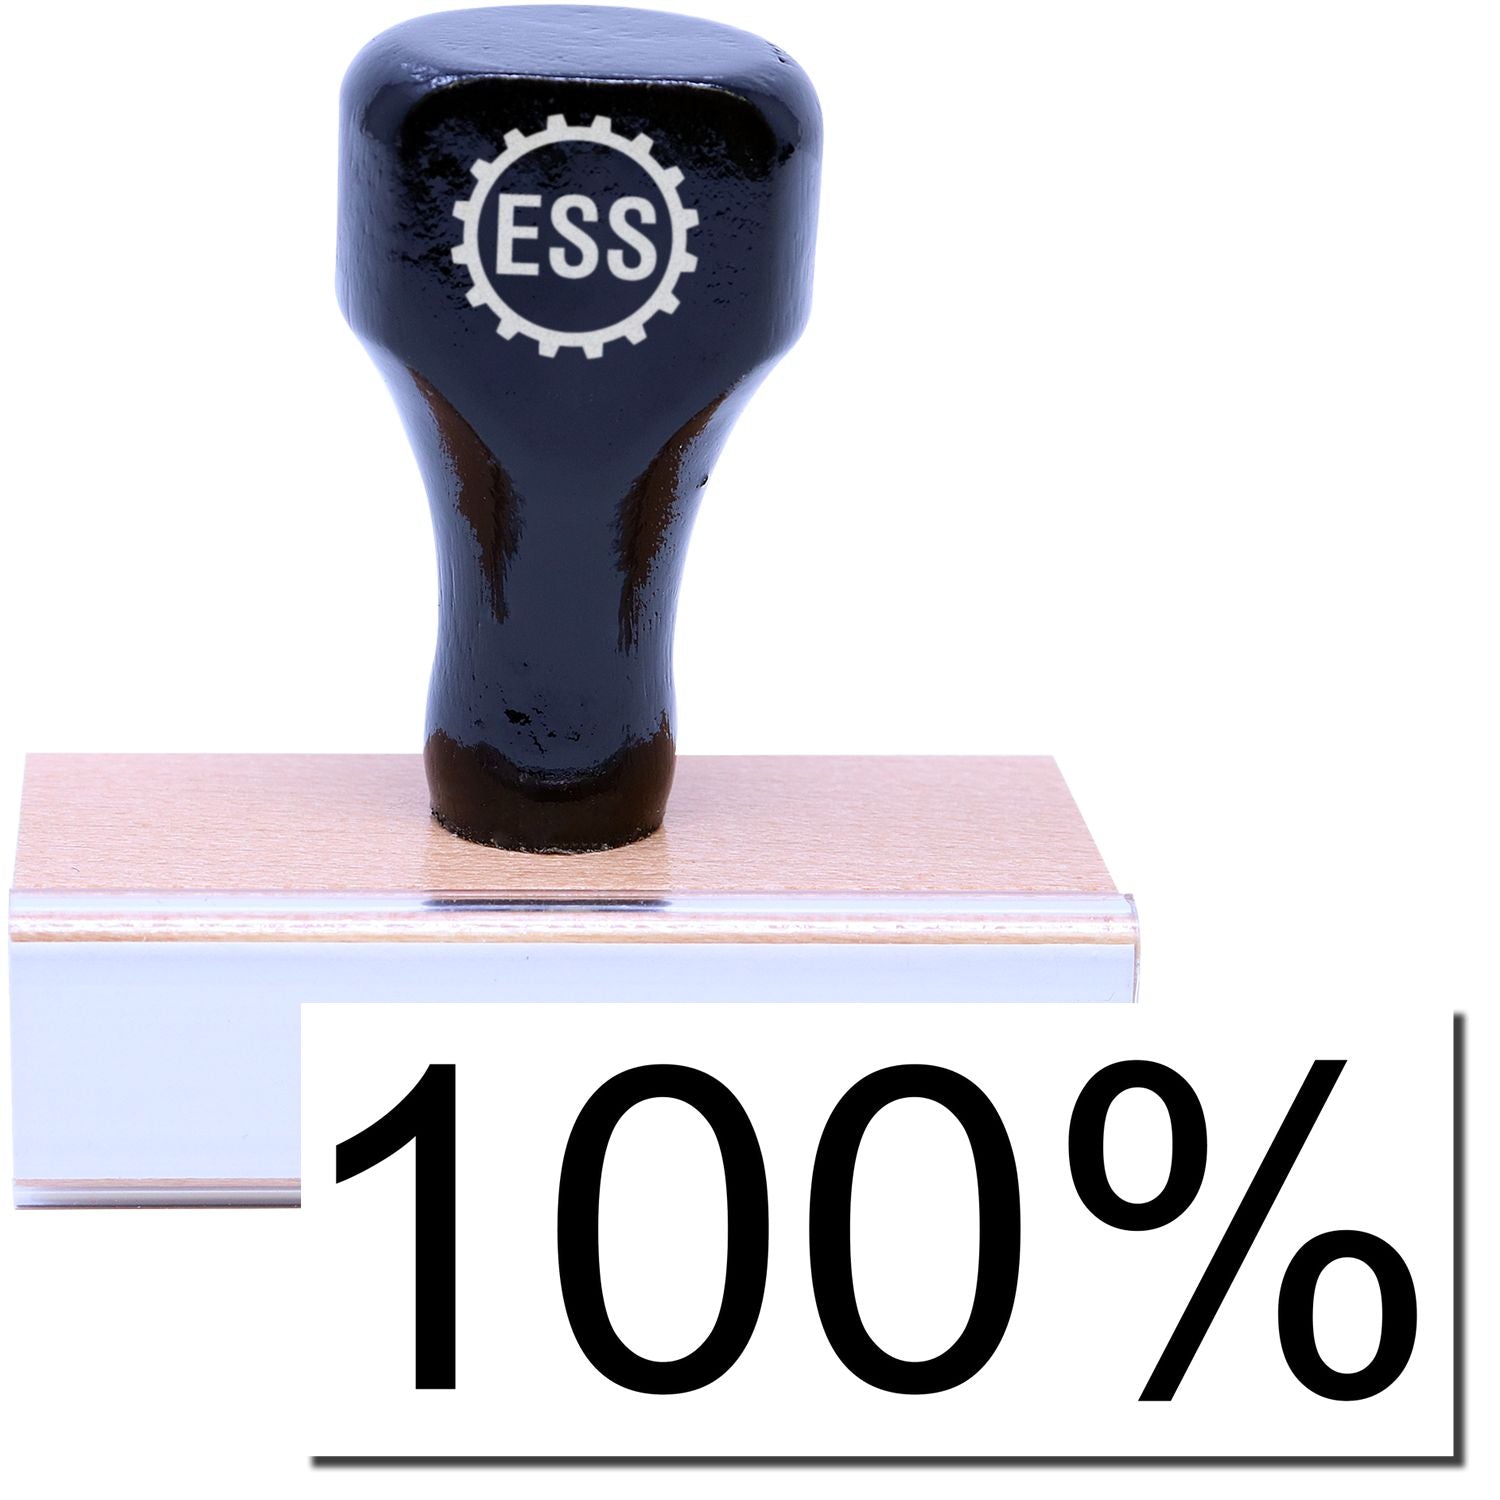 A stock office rubber stamp with a stamped image showing how the text "100%" is displayed after stamping.